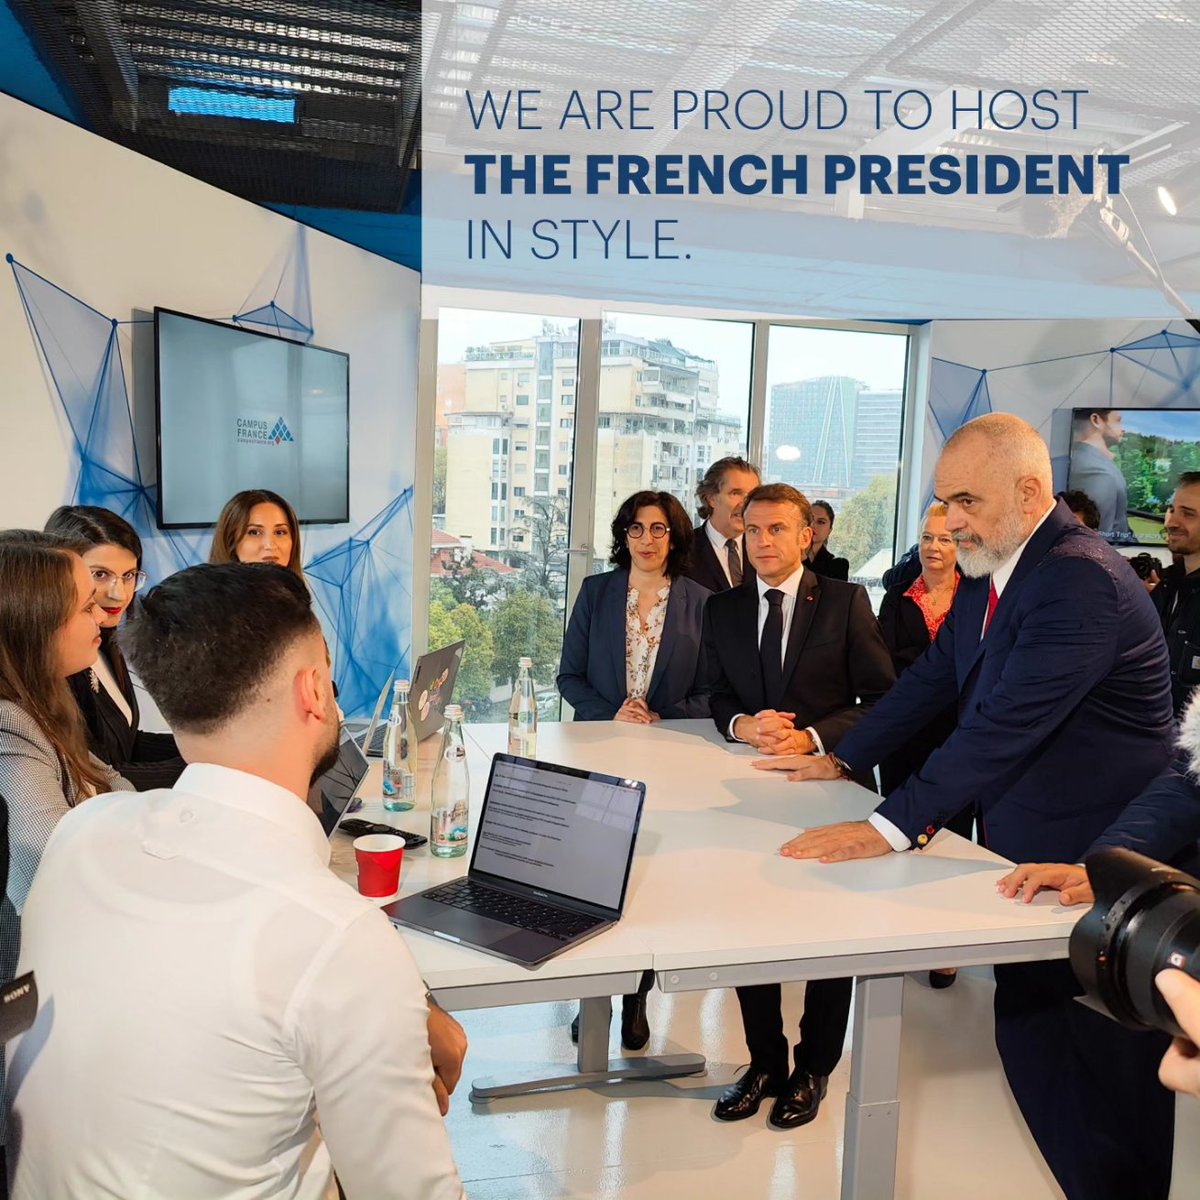 From #creative concept to realization: Welcome to 🇫🇷 'KubFrance Tirana' 🇦🇱 where we are proud to host the French President in style. Explore the elegance, creativity, and diplomatic charm that make this cube and event unforgettable.